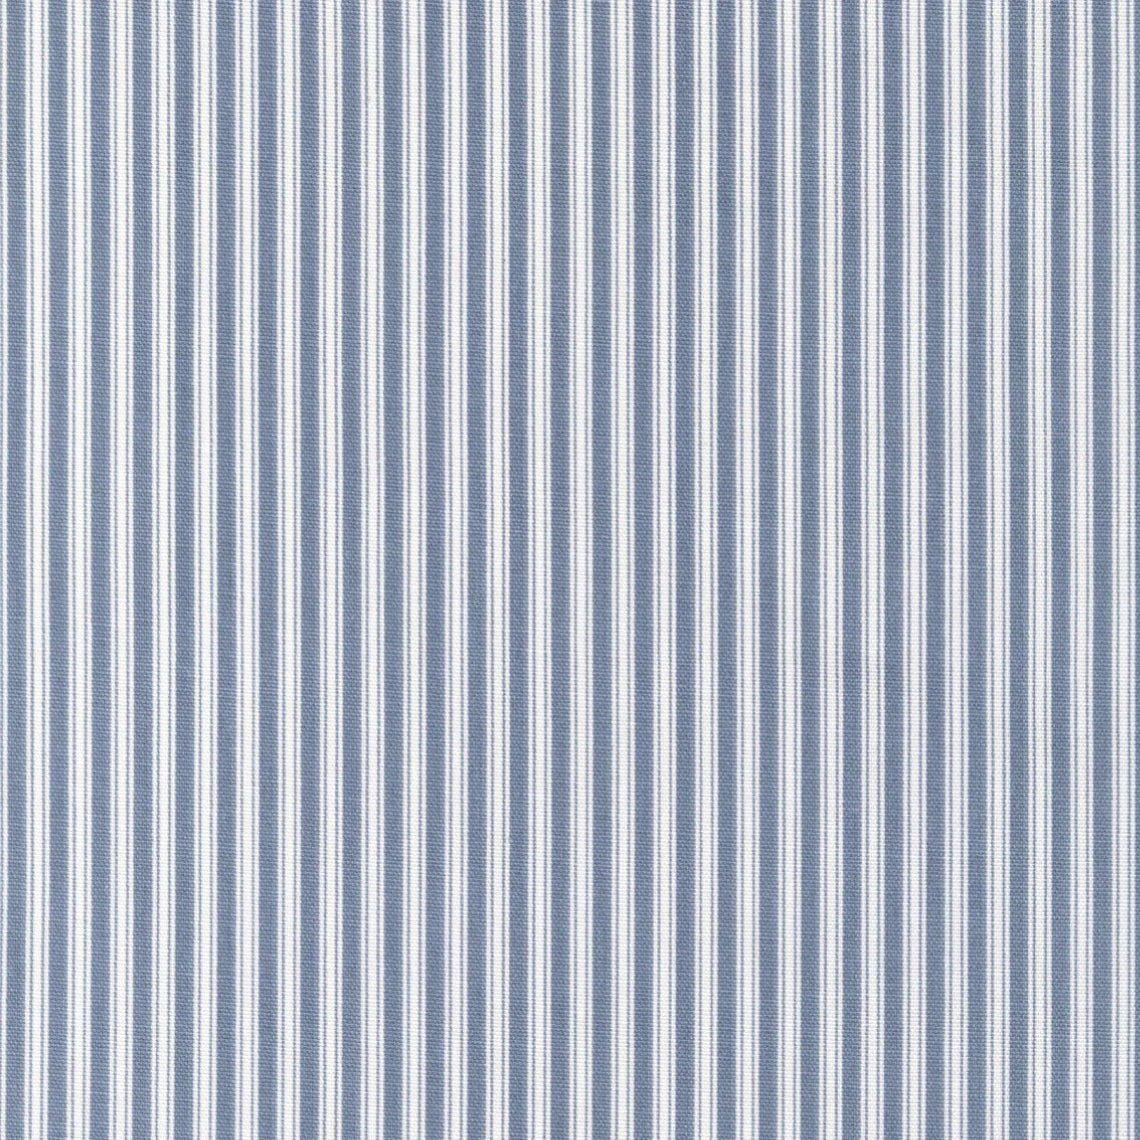 tie-up valance in polo sail blue stripe on white